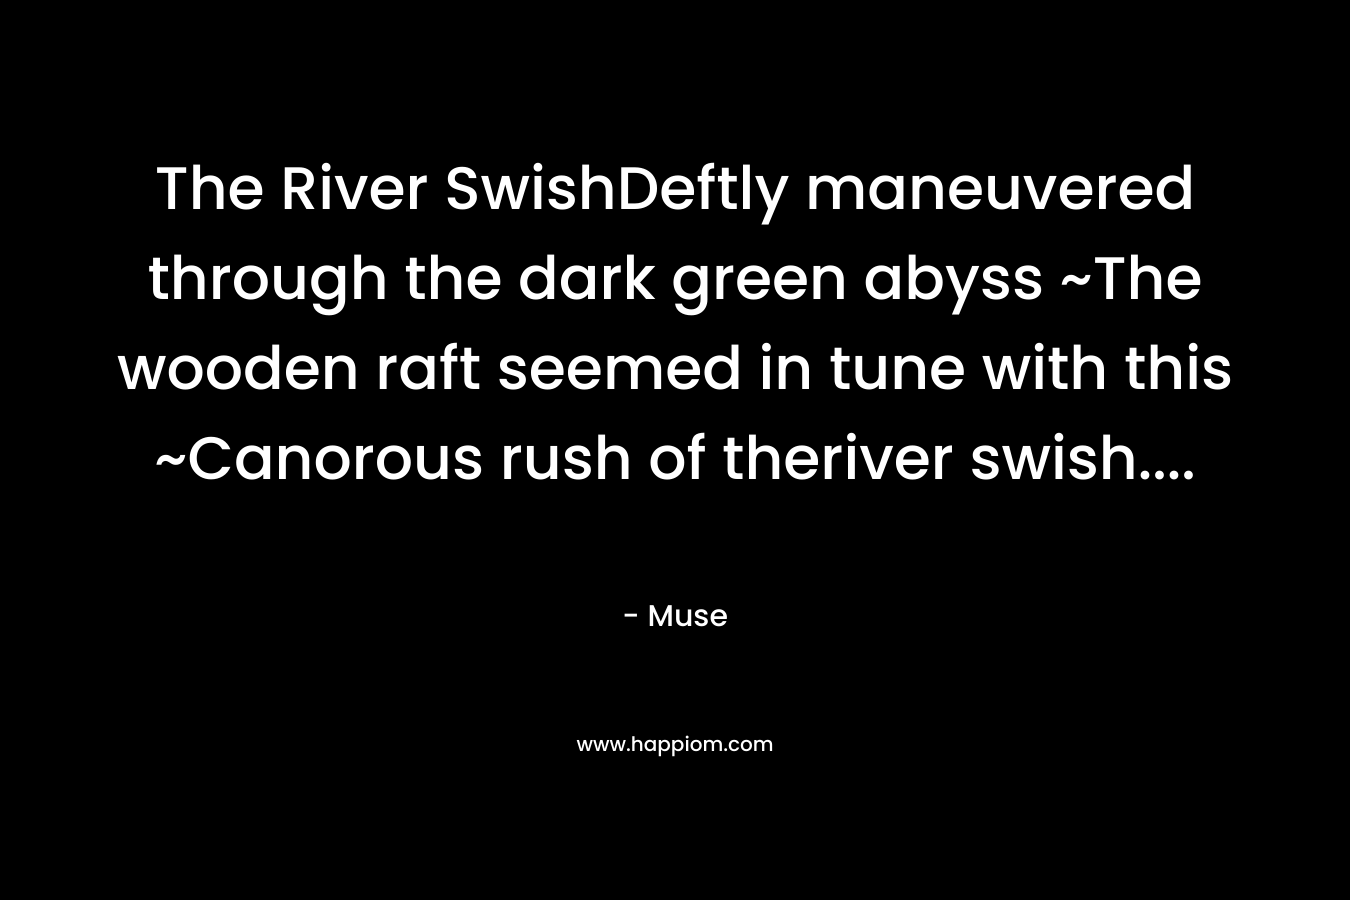 The River SwishDeftly maneuvered through the dark green abyss ~The wooden raft seemed in tune with this ~Canorous rush of theriver swish....